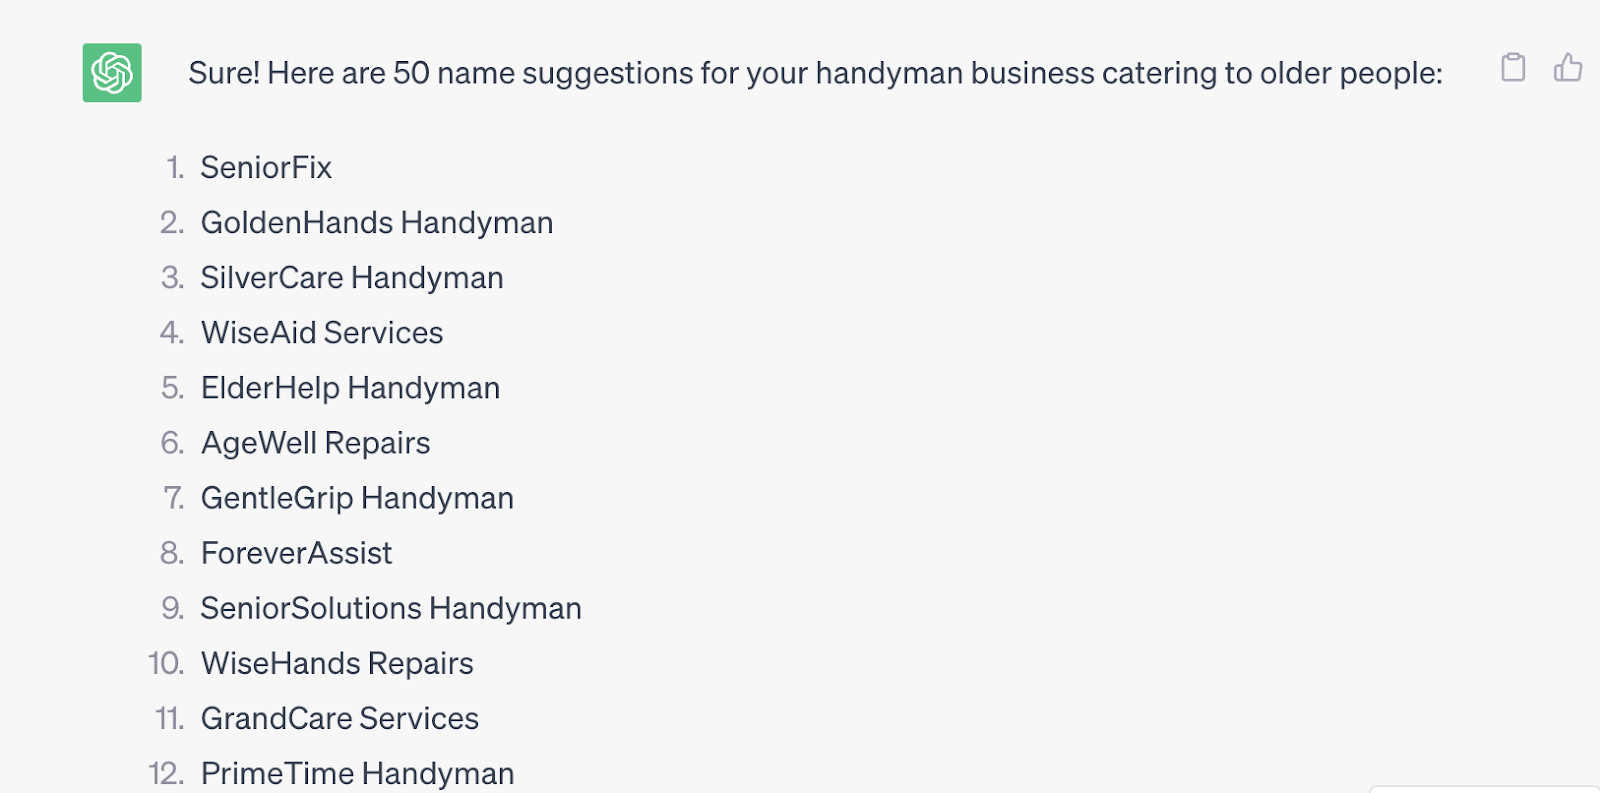 Results from ChatGPT prompt to create 50 business names for a handyman business for older customers.